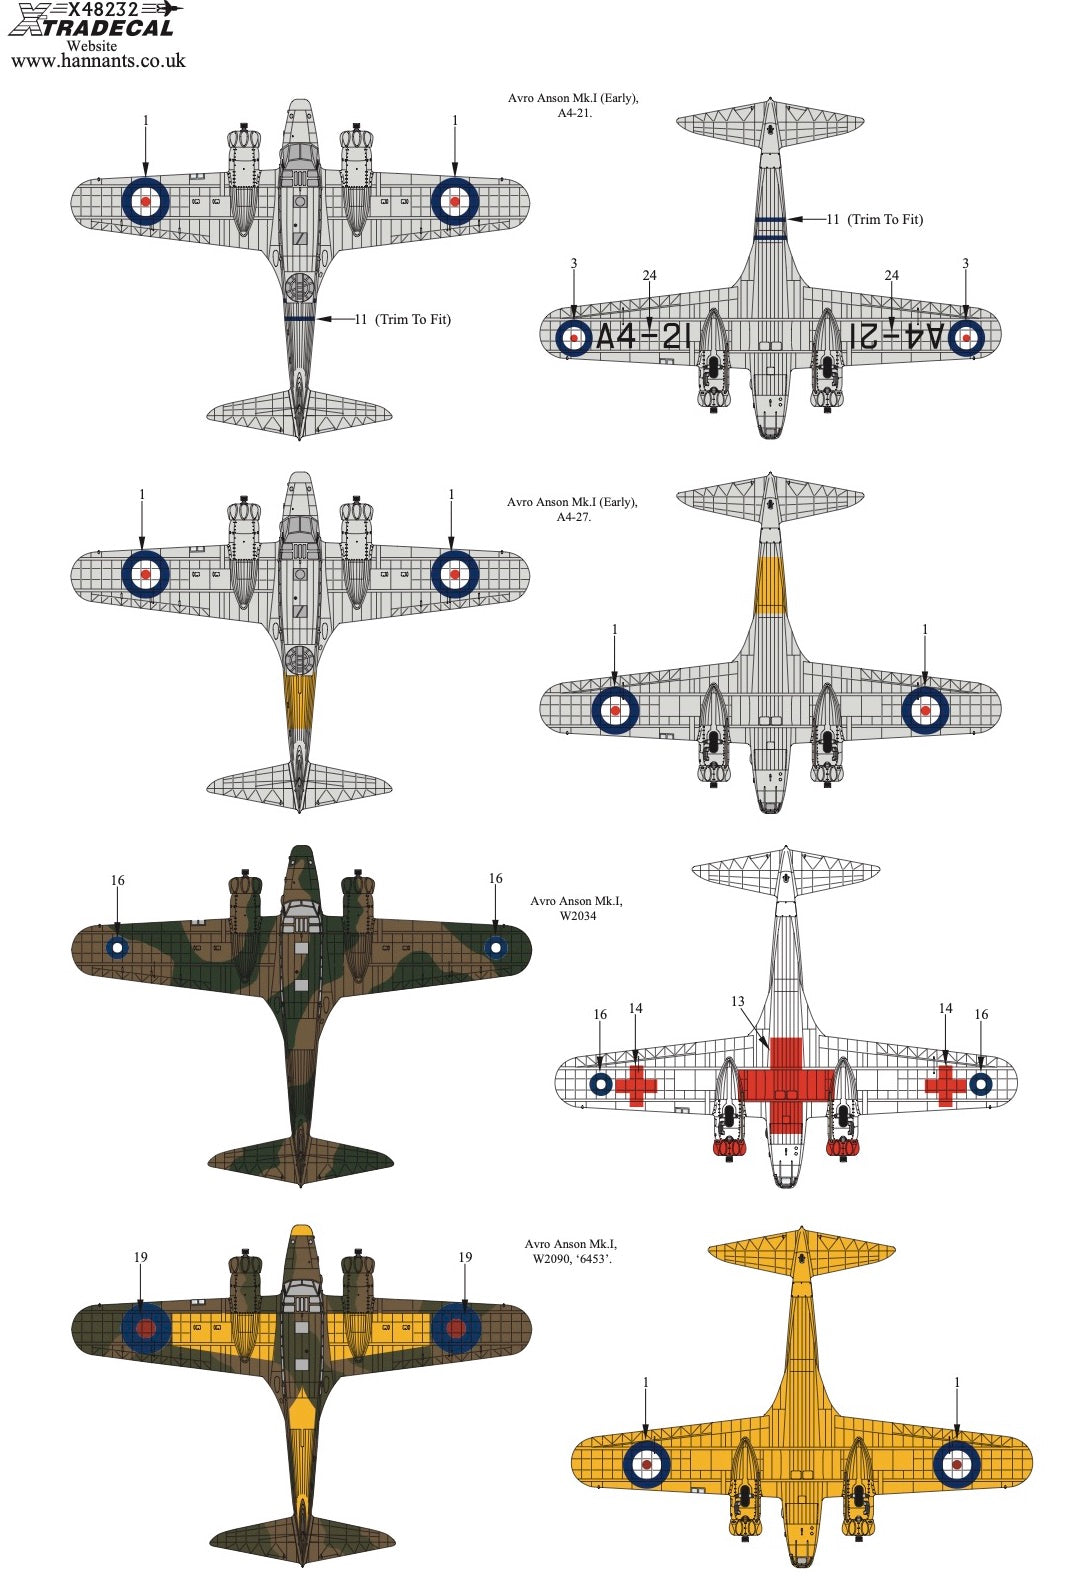 Xtradecal X48232 Avro Anson Mk.I Collection Part 2 1/48